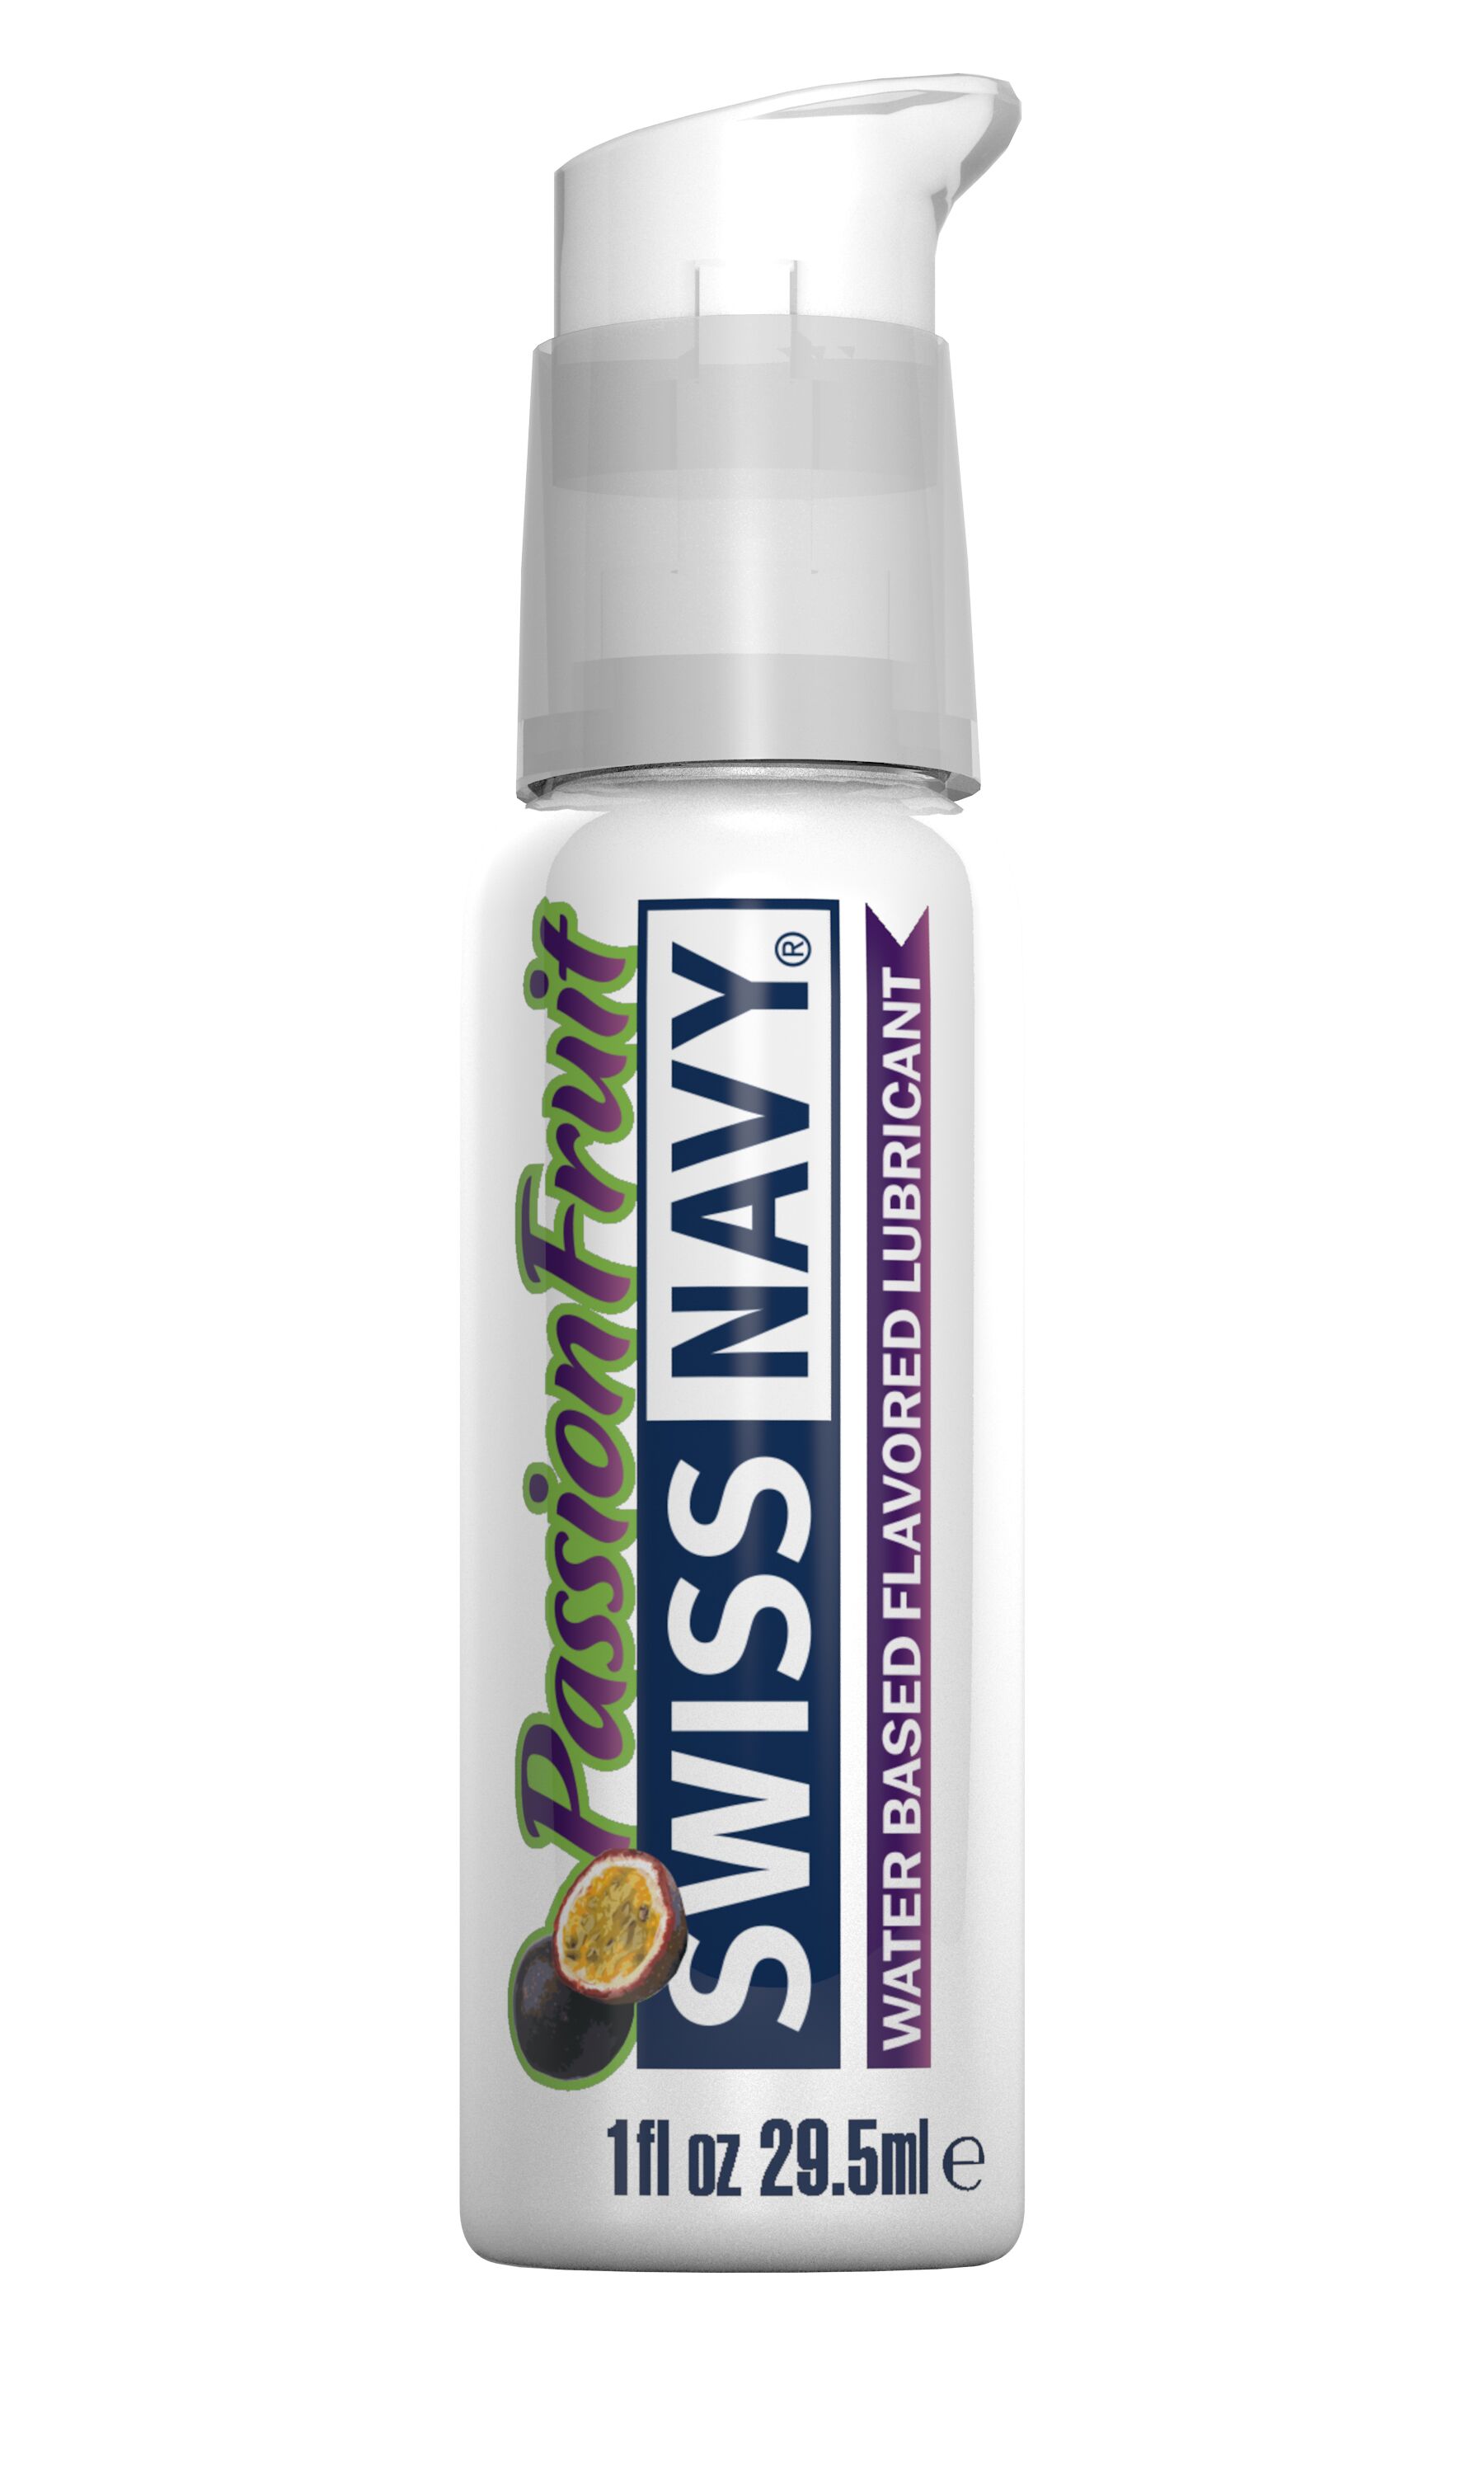 SWISS NAVY PASSION FRUIT FLAVORED LUBE 1 OZ - Click Image to Close